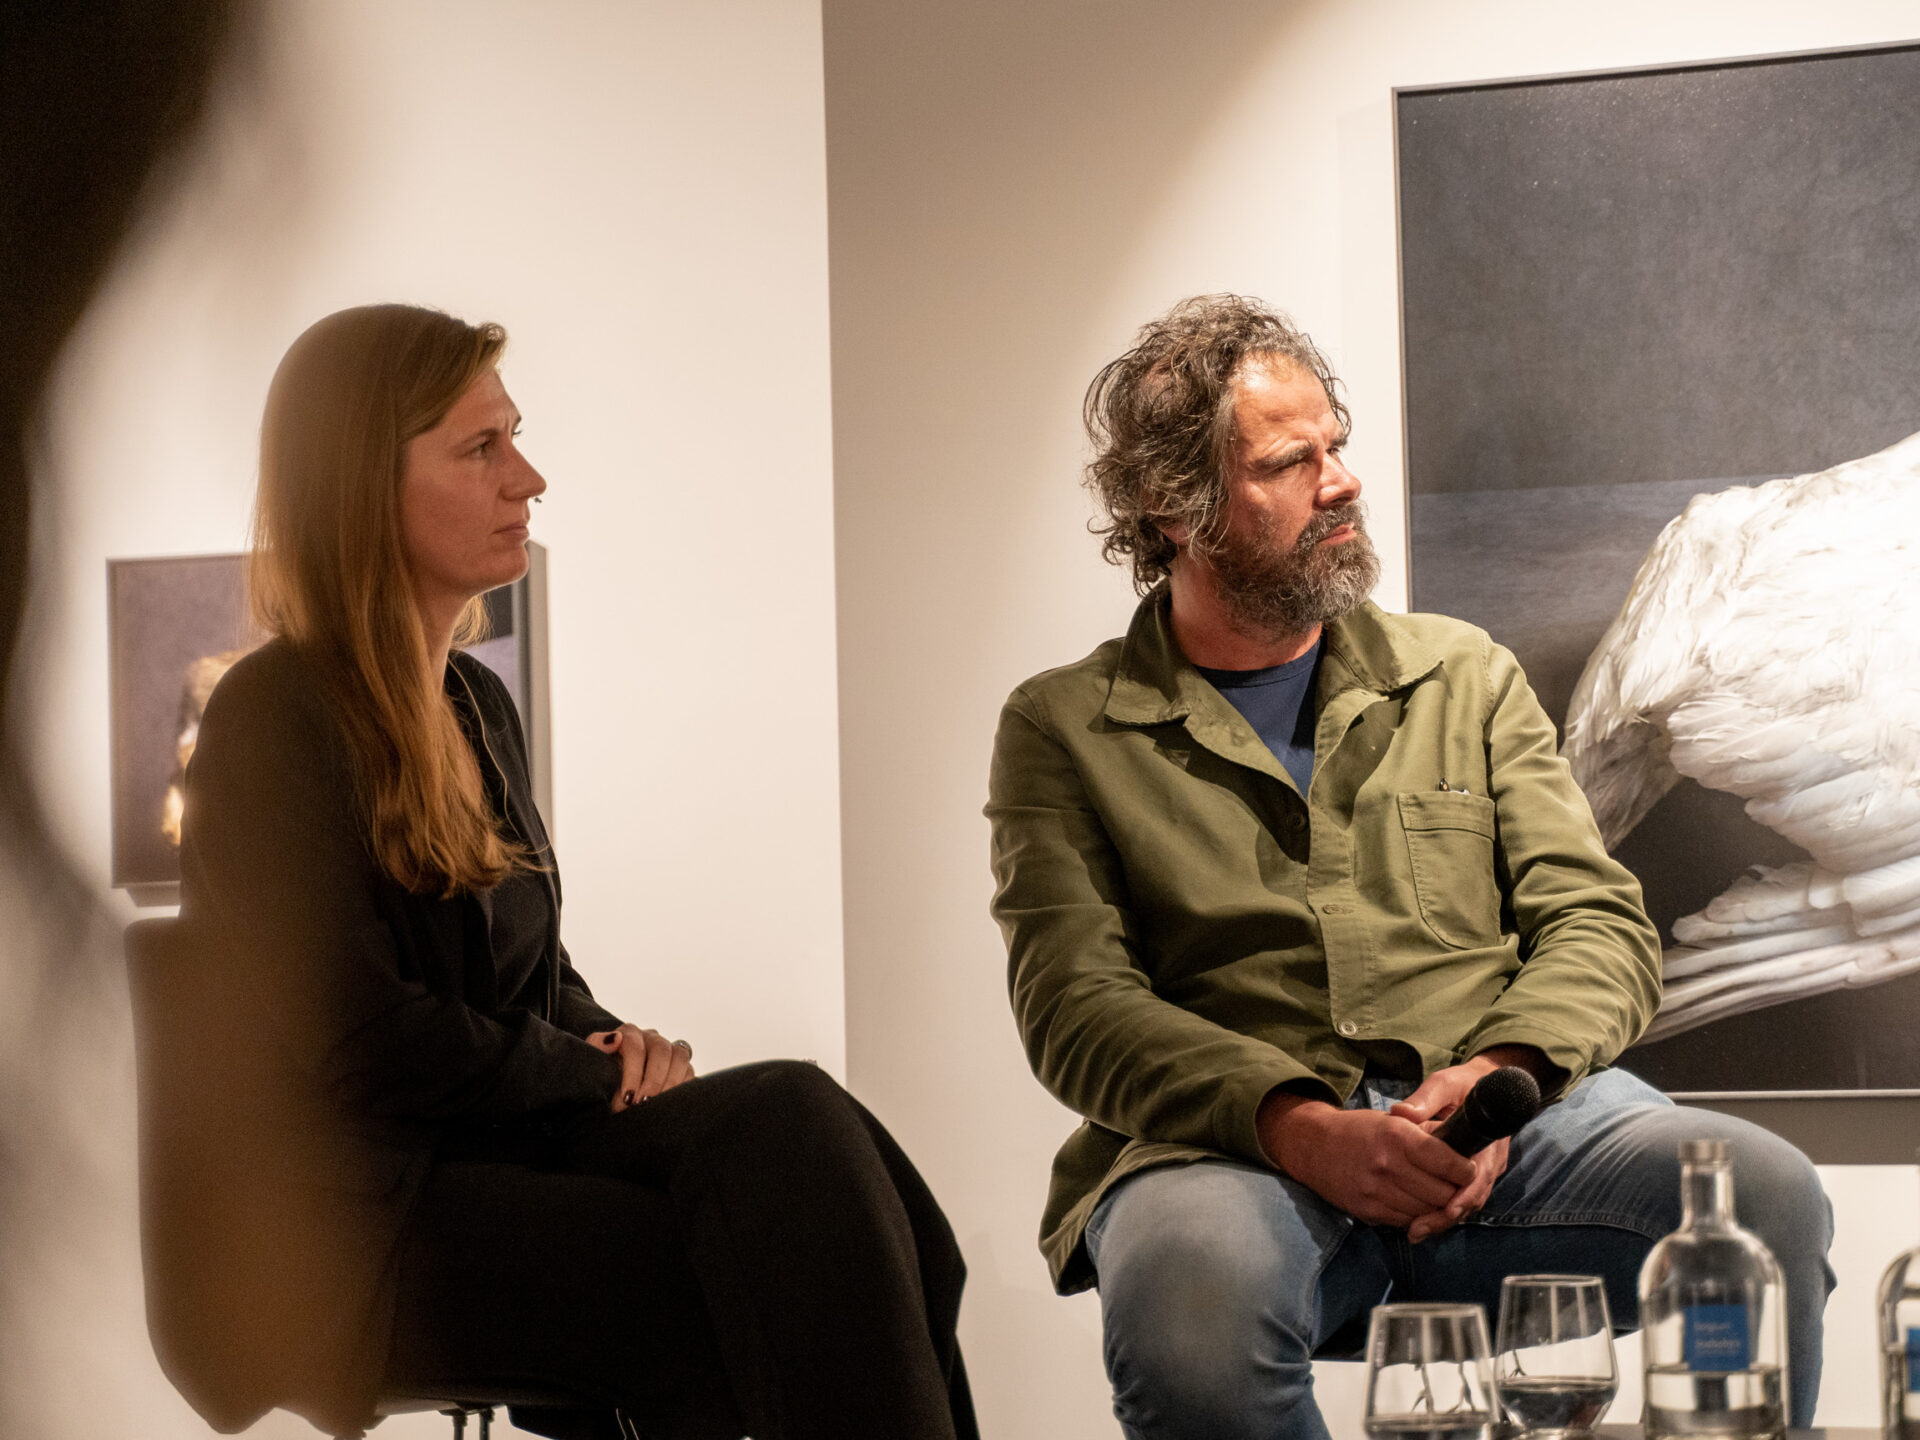 Belgium Sothebys Int. Realty Panel discussion on photography – NL